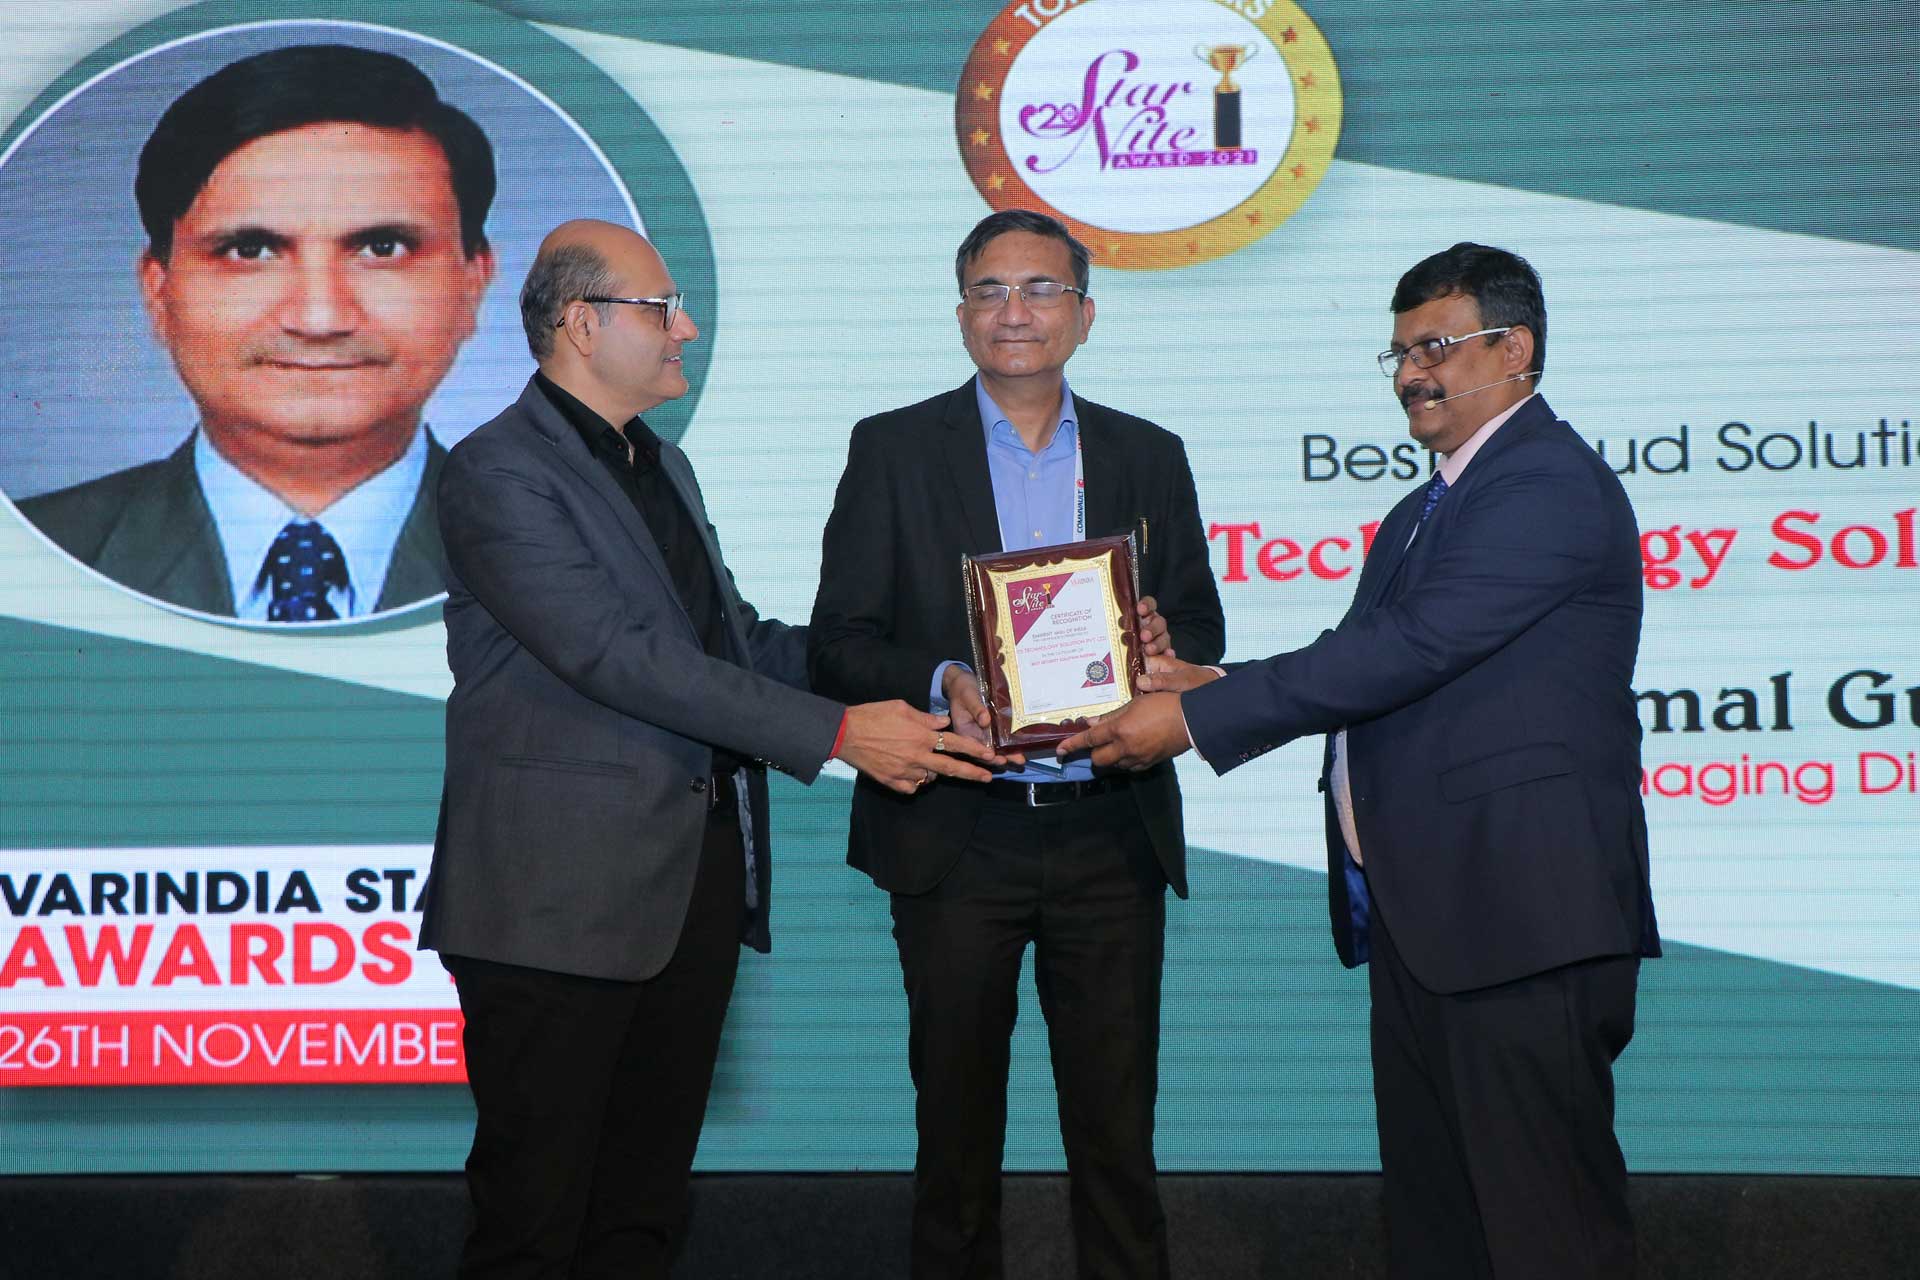 Best Cloud Solution Partner Award goes to ITS Technology Solution Pvt. Ltd., at 20th Star Nite Awards 2021